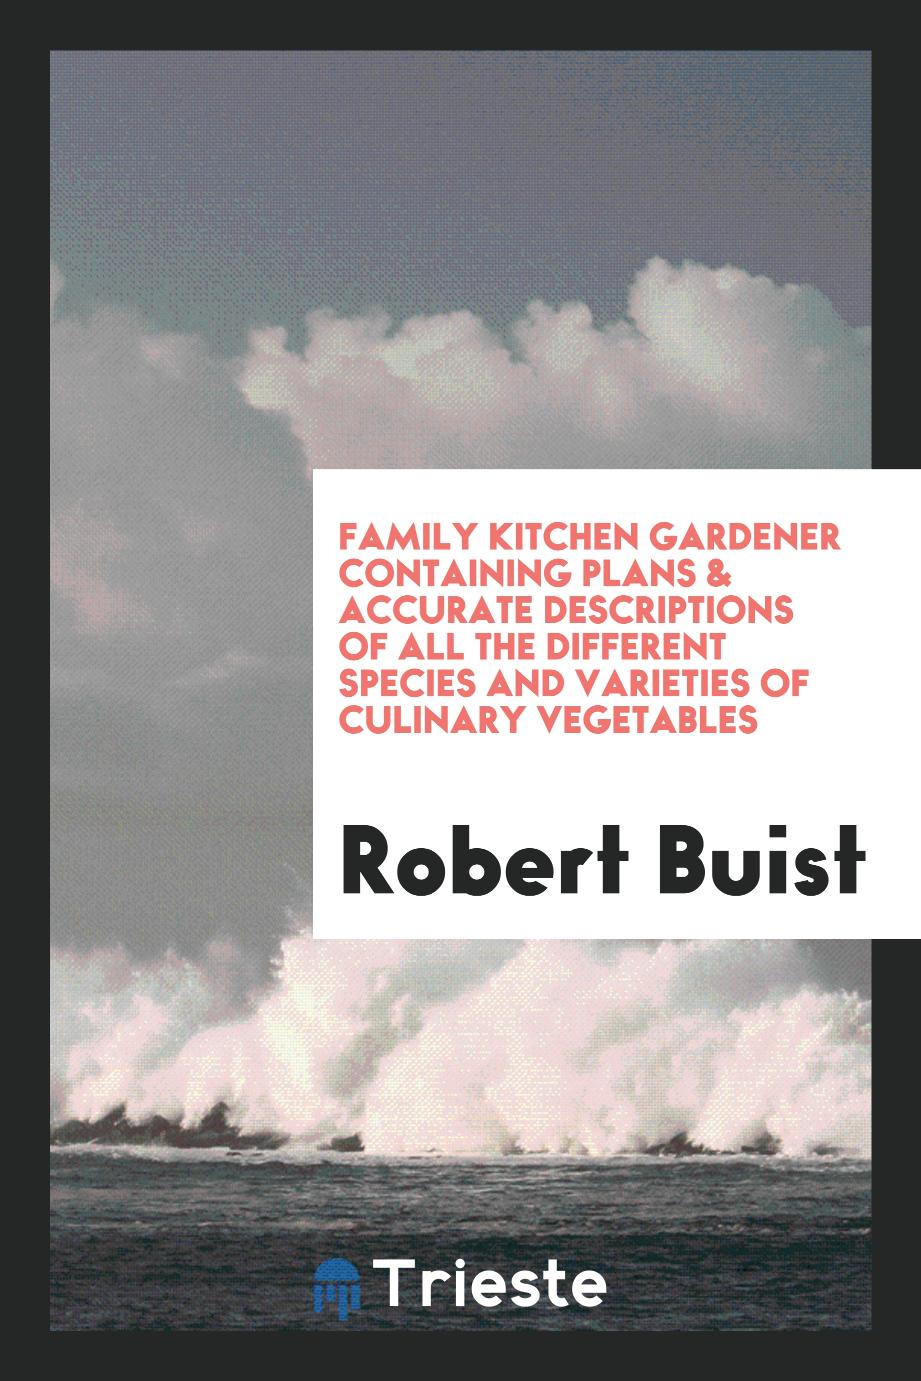 Family Kitchen Gardener Containing Plans & Accurate Descriptions of All the Different Species and Varieties of Culinary Vegetables